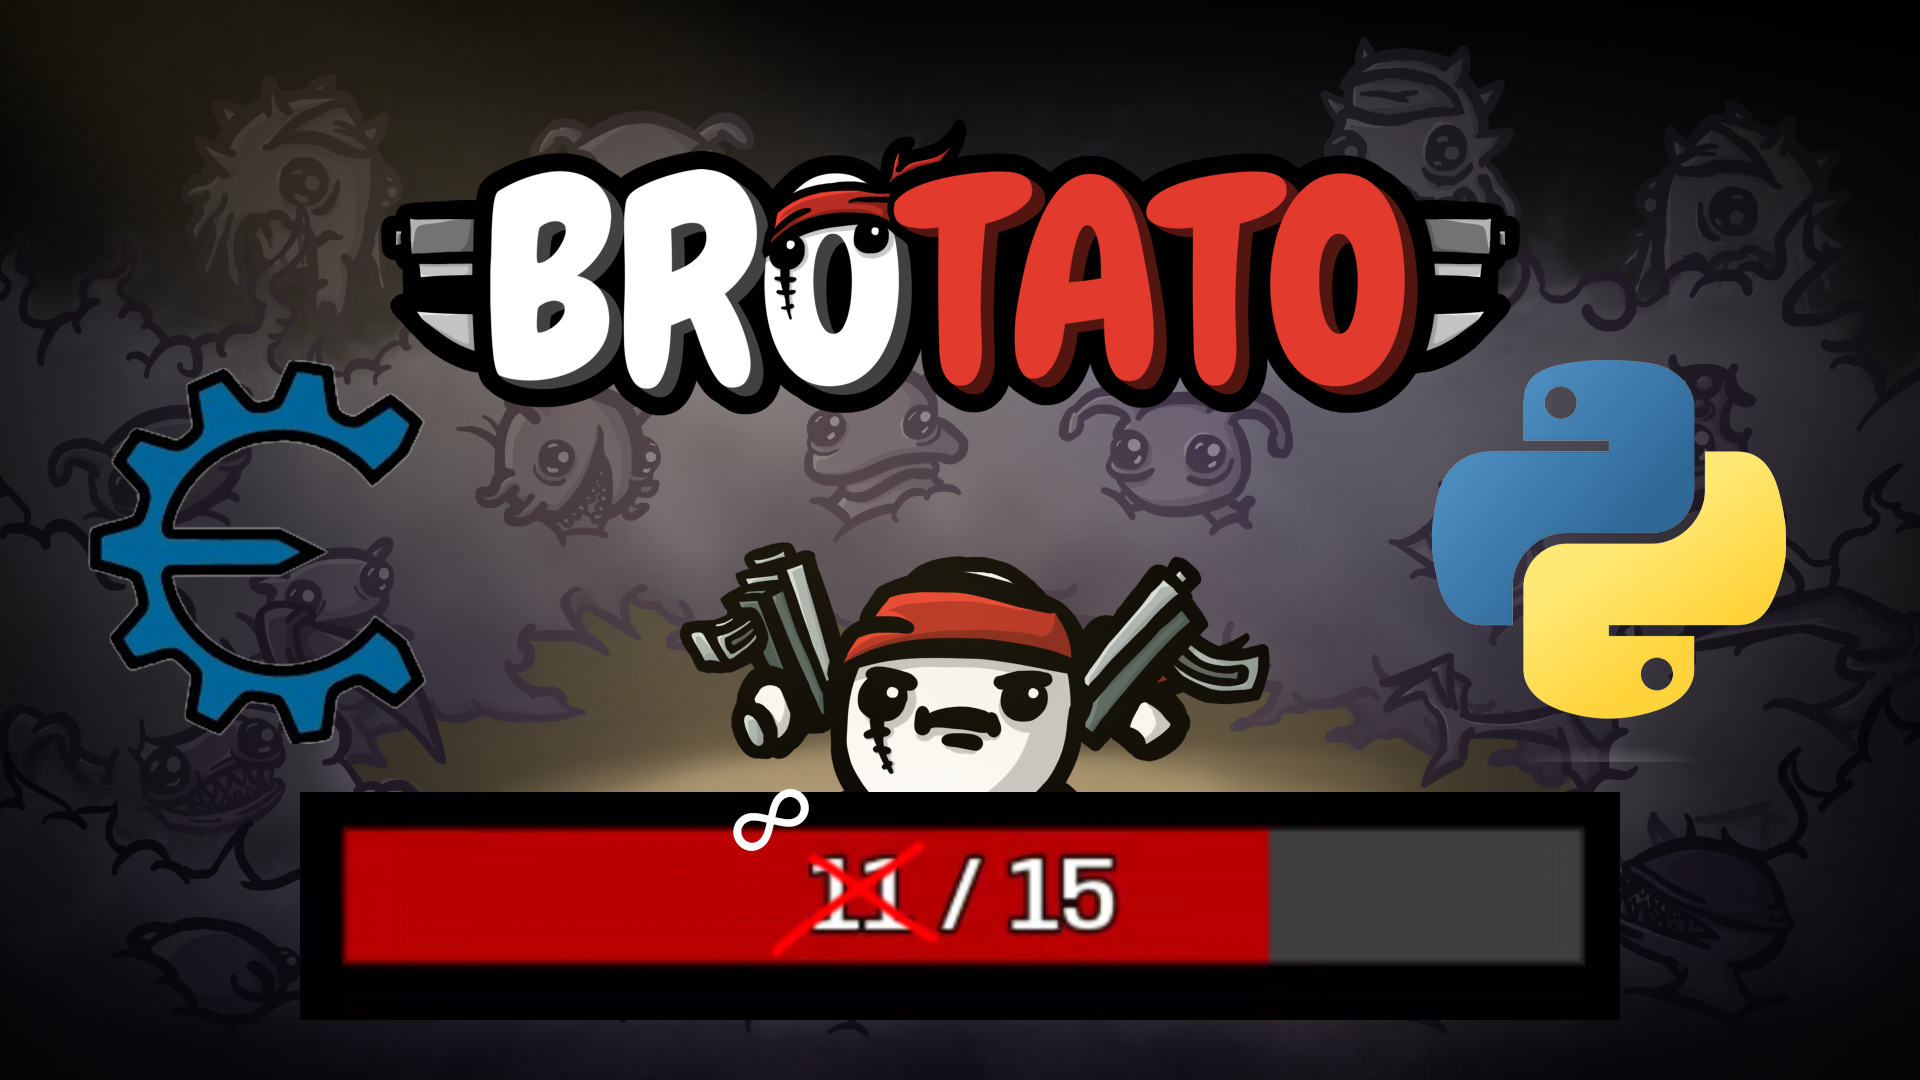 Brotato home screen with a health bar showing infinite health, cheat engine, and Python